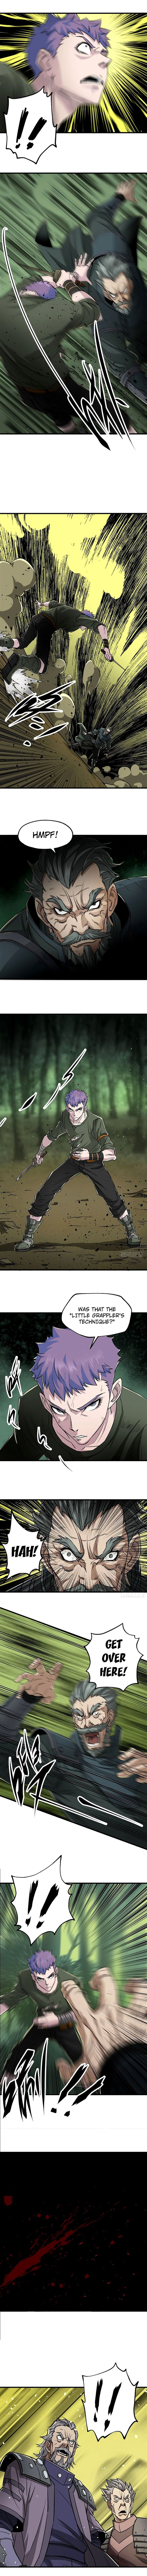 The Hunter Chapter 8 page 6